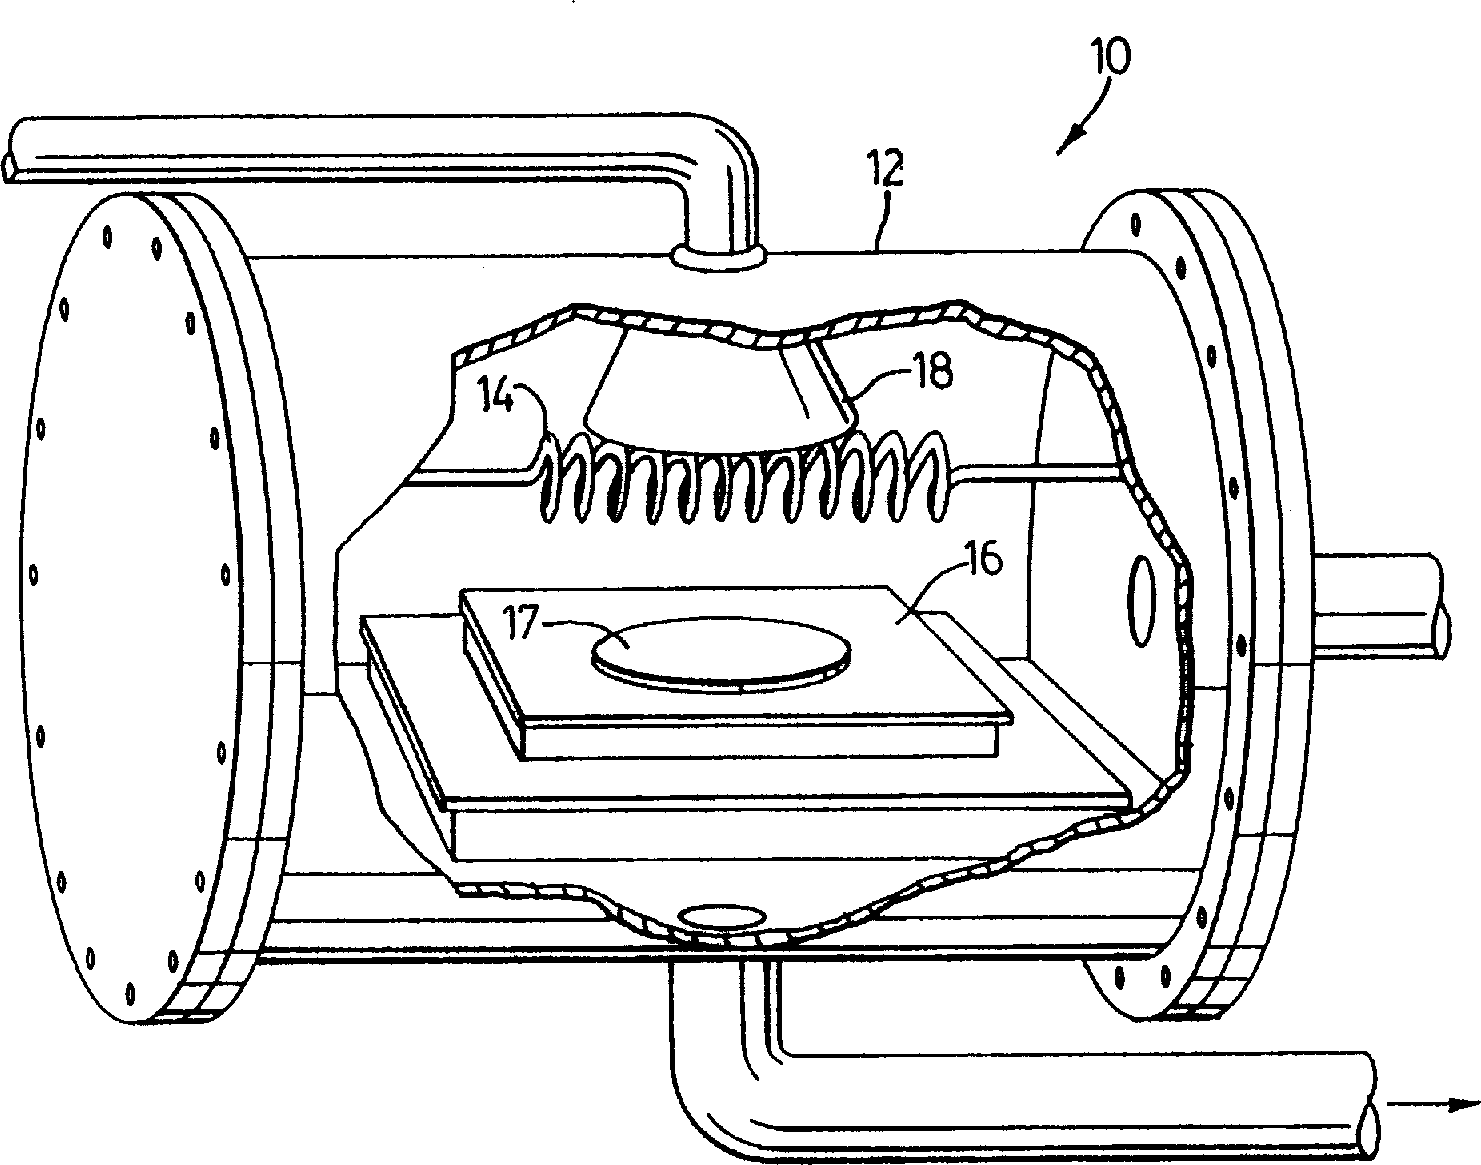 Apparatus and method for nucleotion and deposition of diamond using hot-filament DC plasma